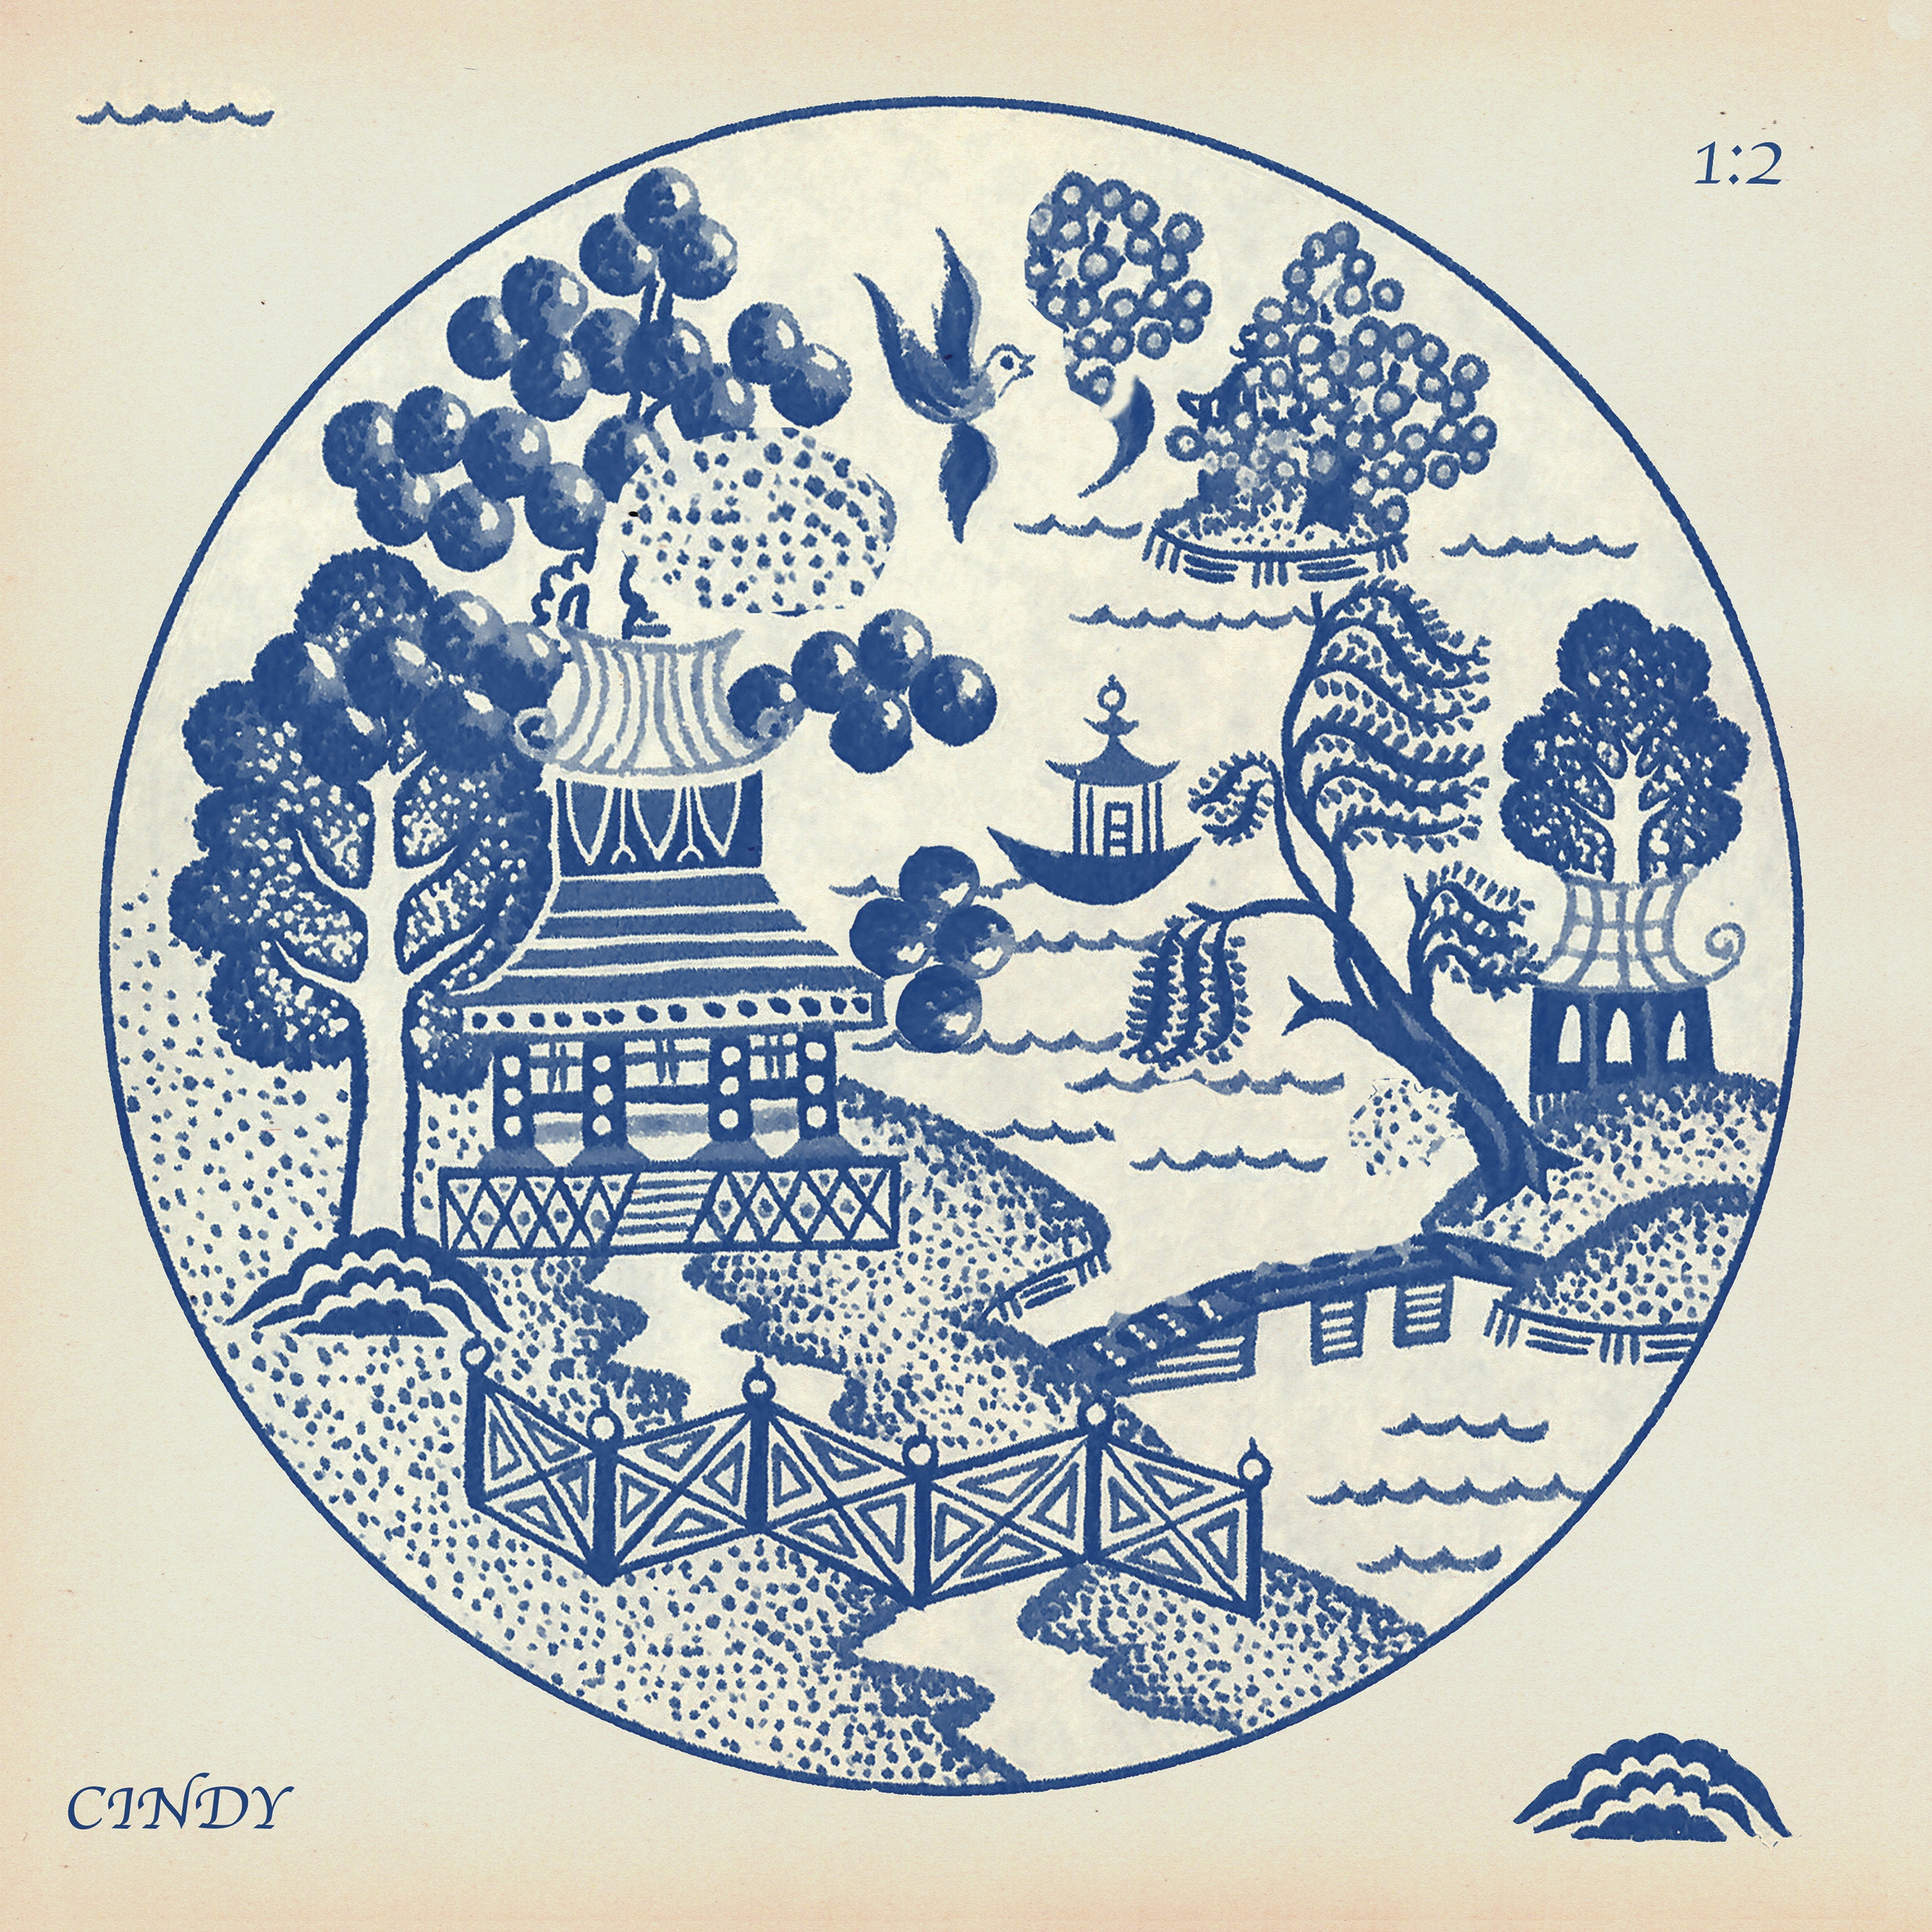 Album artwork for 1:2 by Cindy